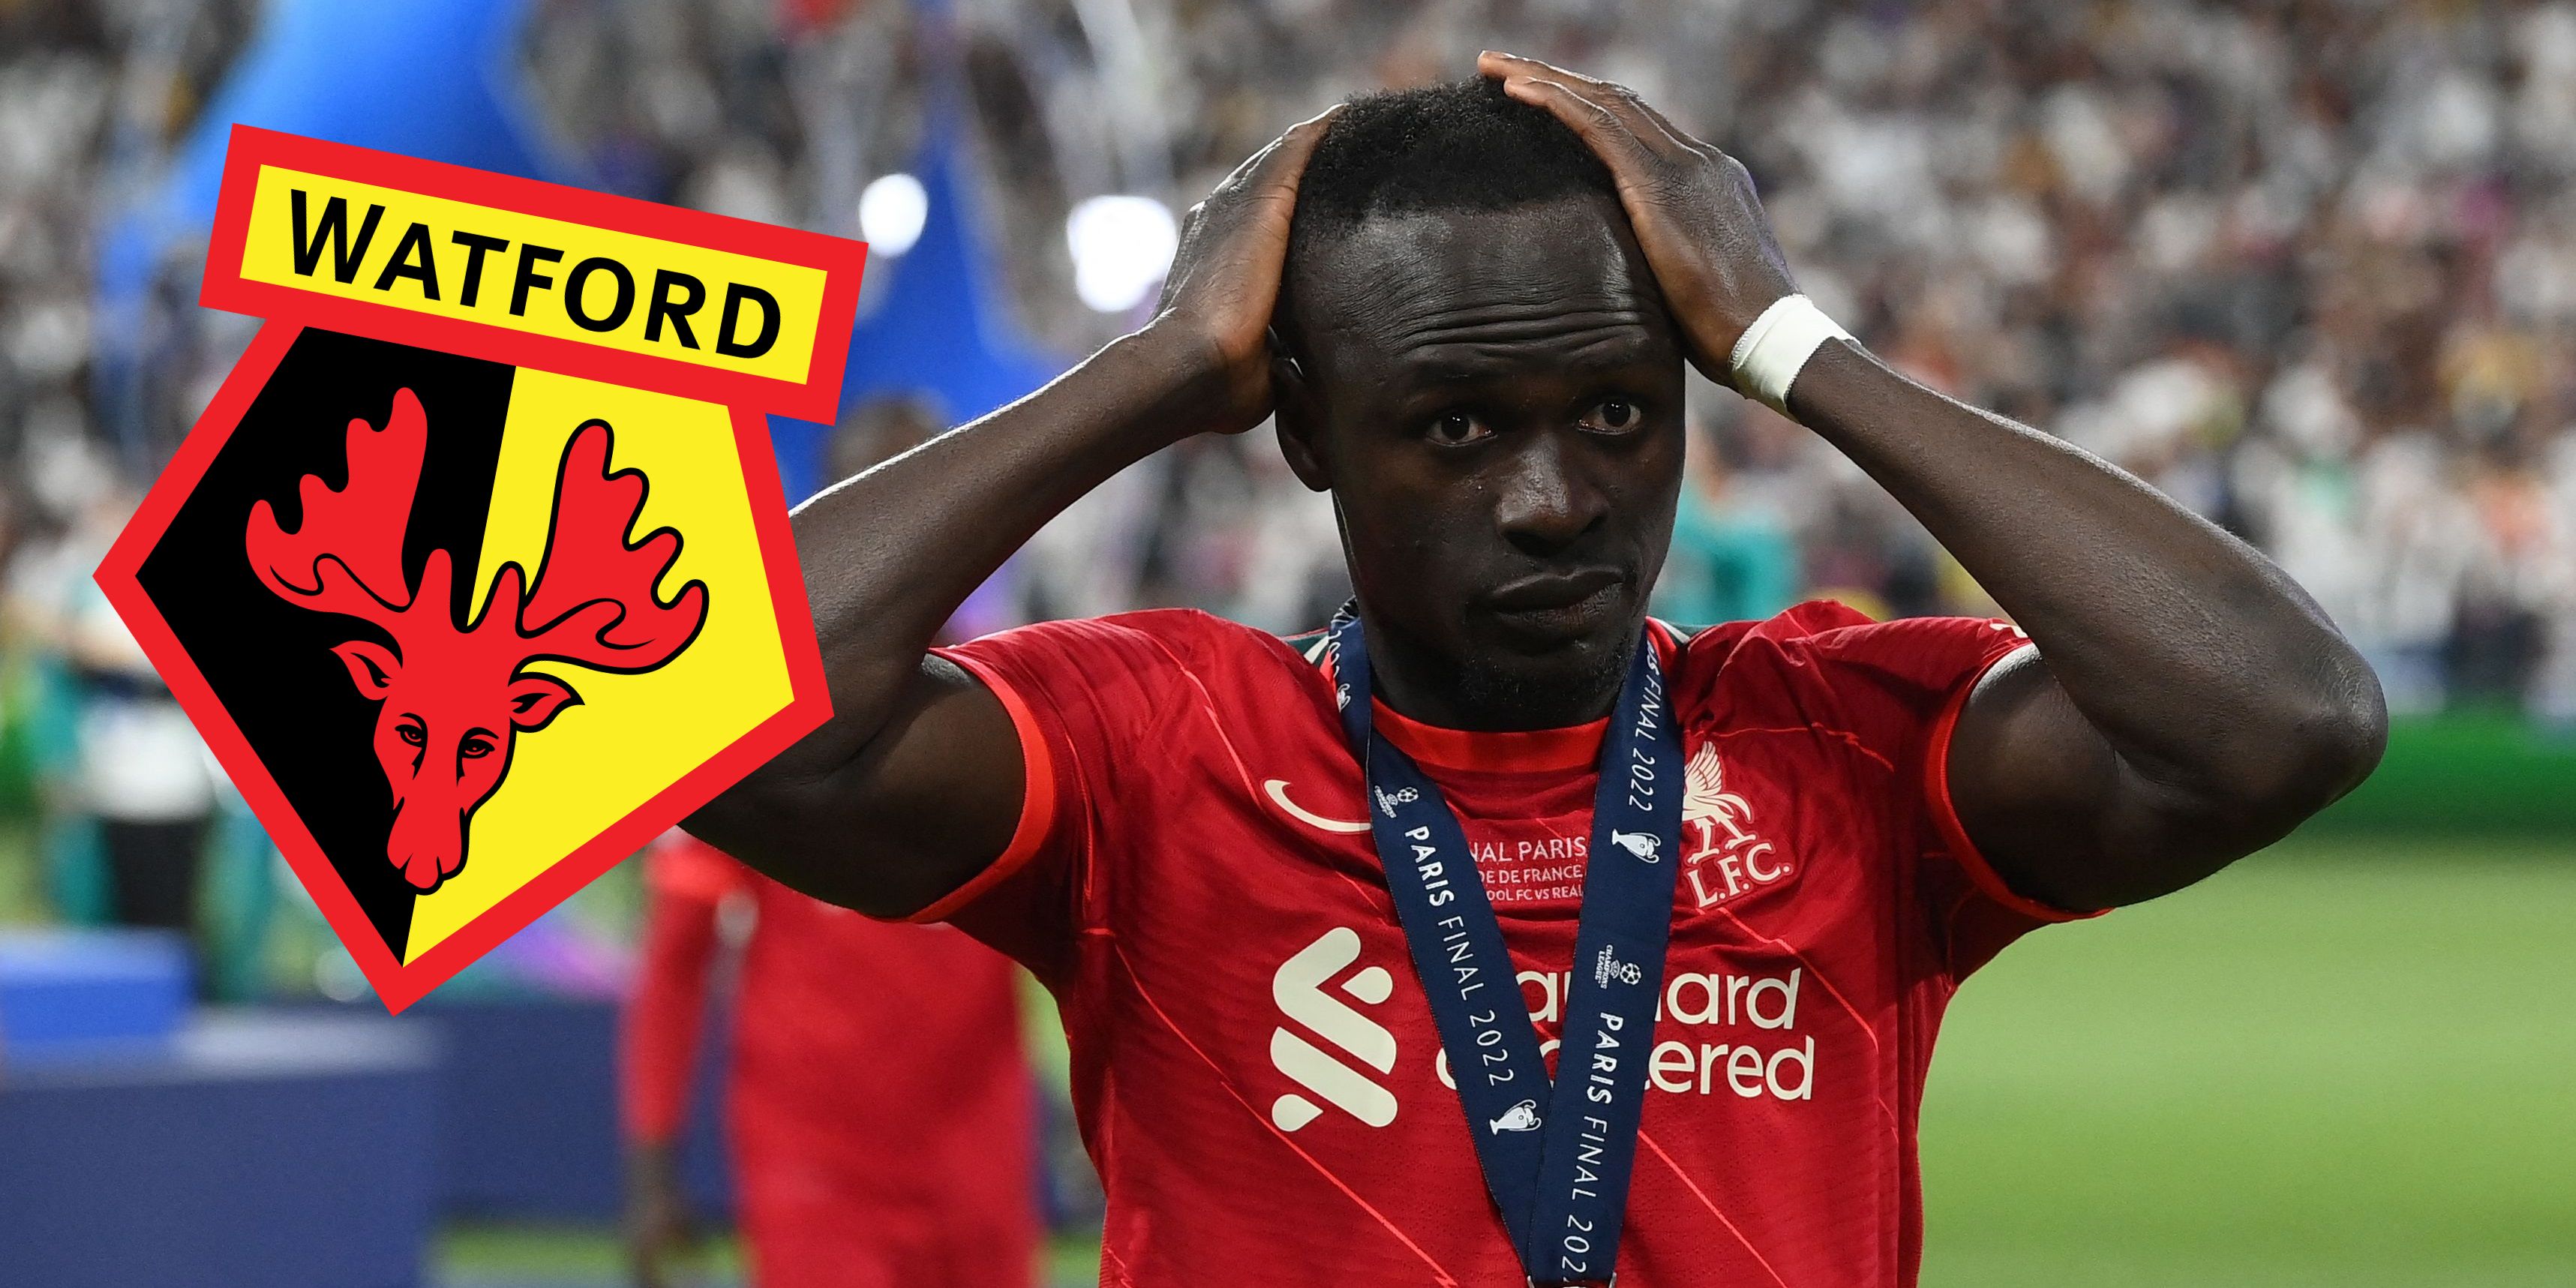 Liverpool tracking two potential bargain attackers aged 20 & 24 from relegated Watford as Mane exit links continue – report